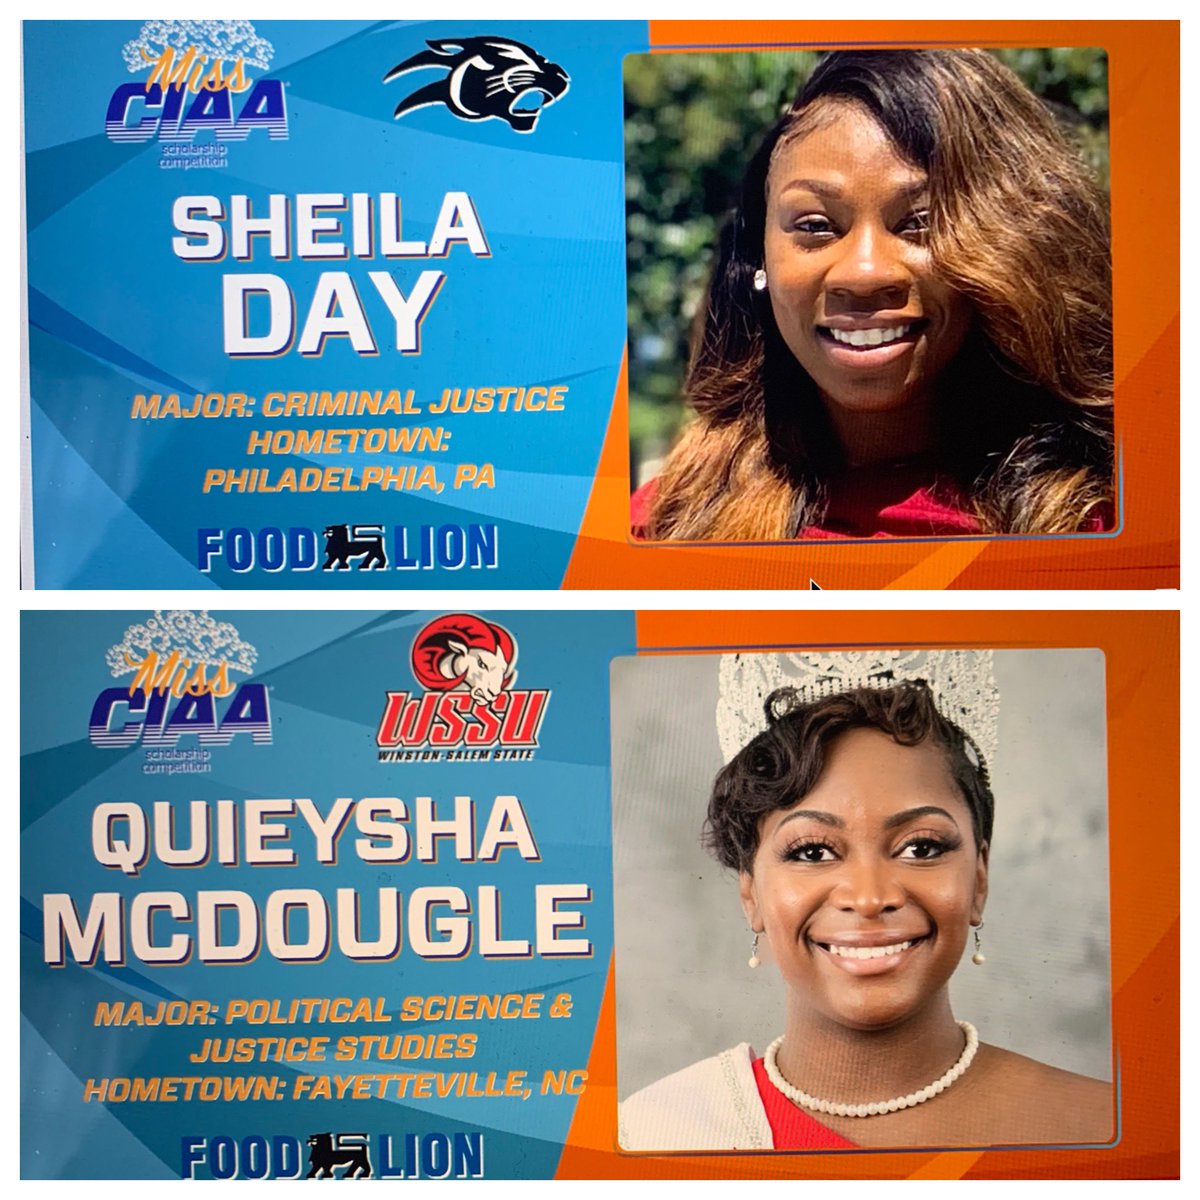 Recognizing our 2020-2021 CIAA campus queens during McDonald’s Super Saturday at the CIAA Virtual Vibe. COVID didn’t allow for the Food Lion’s Miss CIAA Scholarship Competition this year, but we’ll be back in 2022. 👸🏾👸🏽👸🏿 #CIAAVirtualVibe #LiveTheLegacy #TheLegacyLivesOn